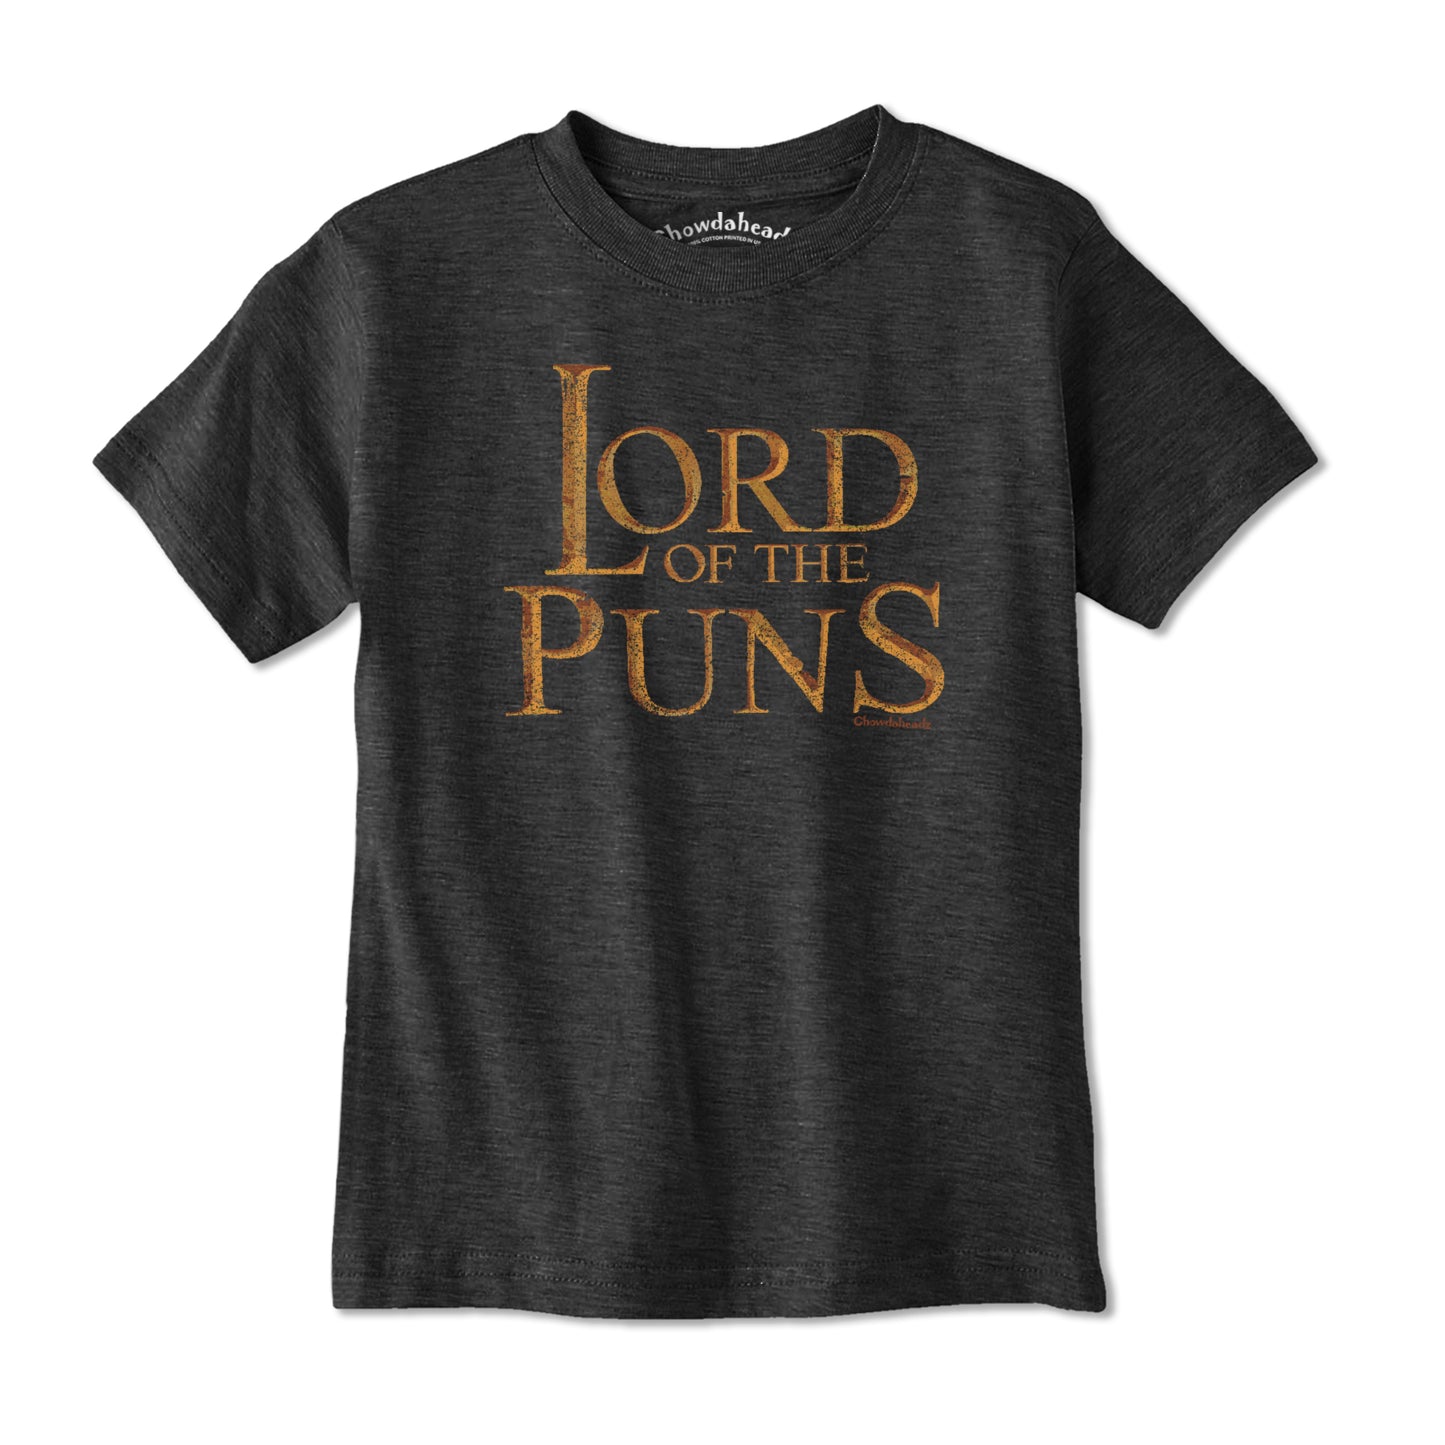 Lord Of The Puns Youth T-Shirt - Chowdaheadz